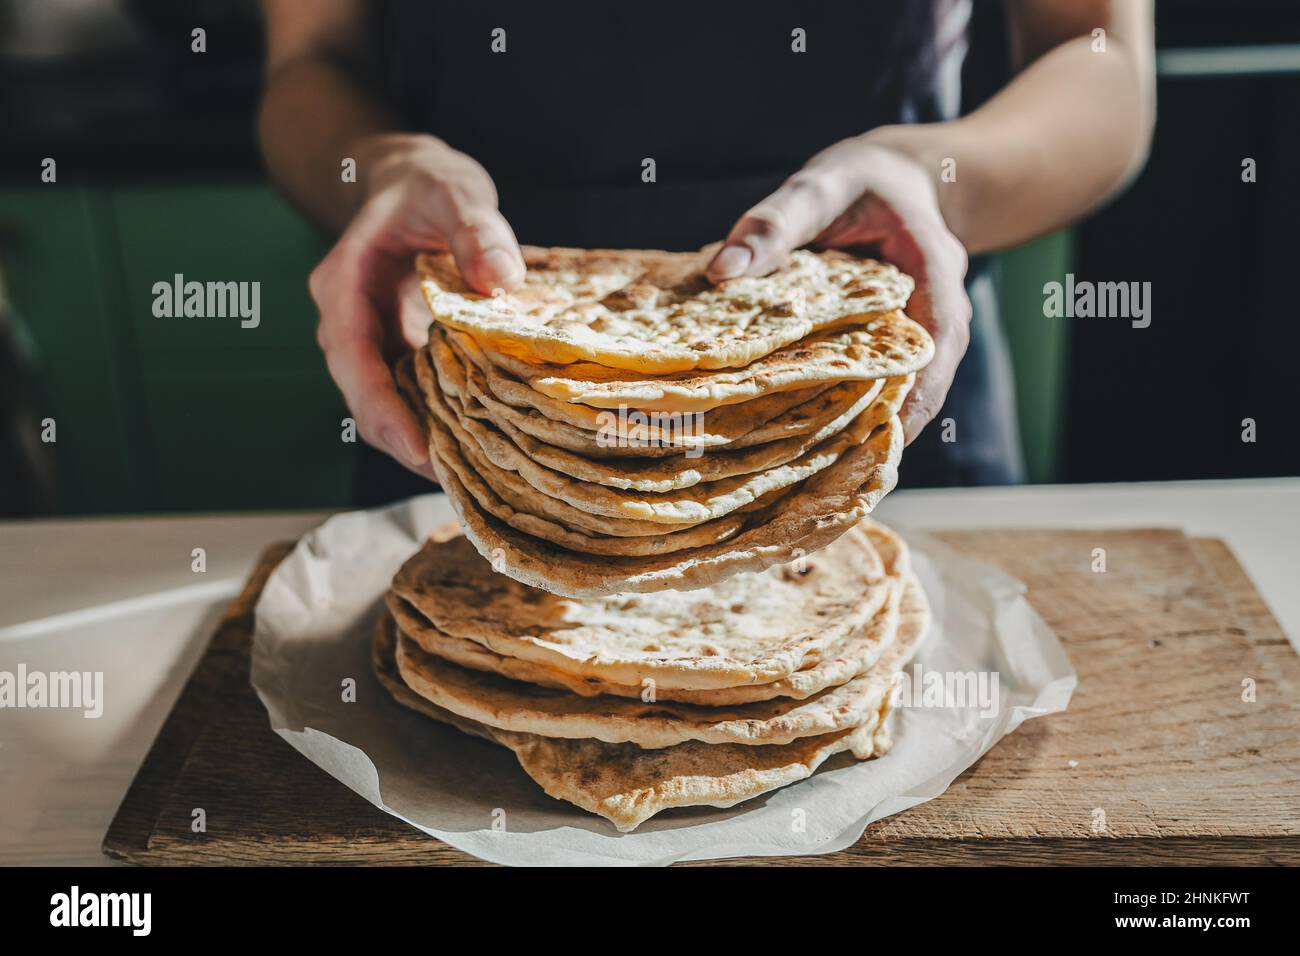 Thin round cakes of lavash are stacked, hands of cook stretch lavash forward for testing. Spanish flatbread or armenian lavash close-up Stock Photo